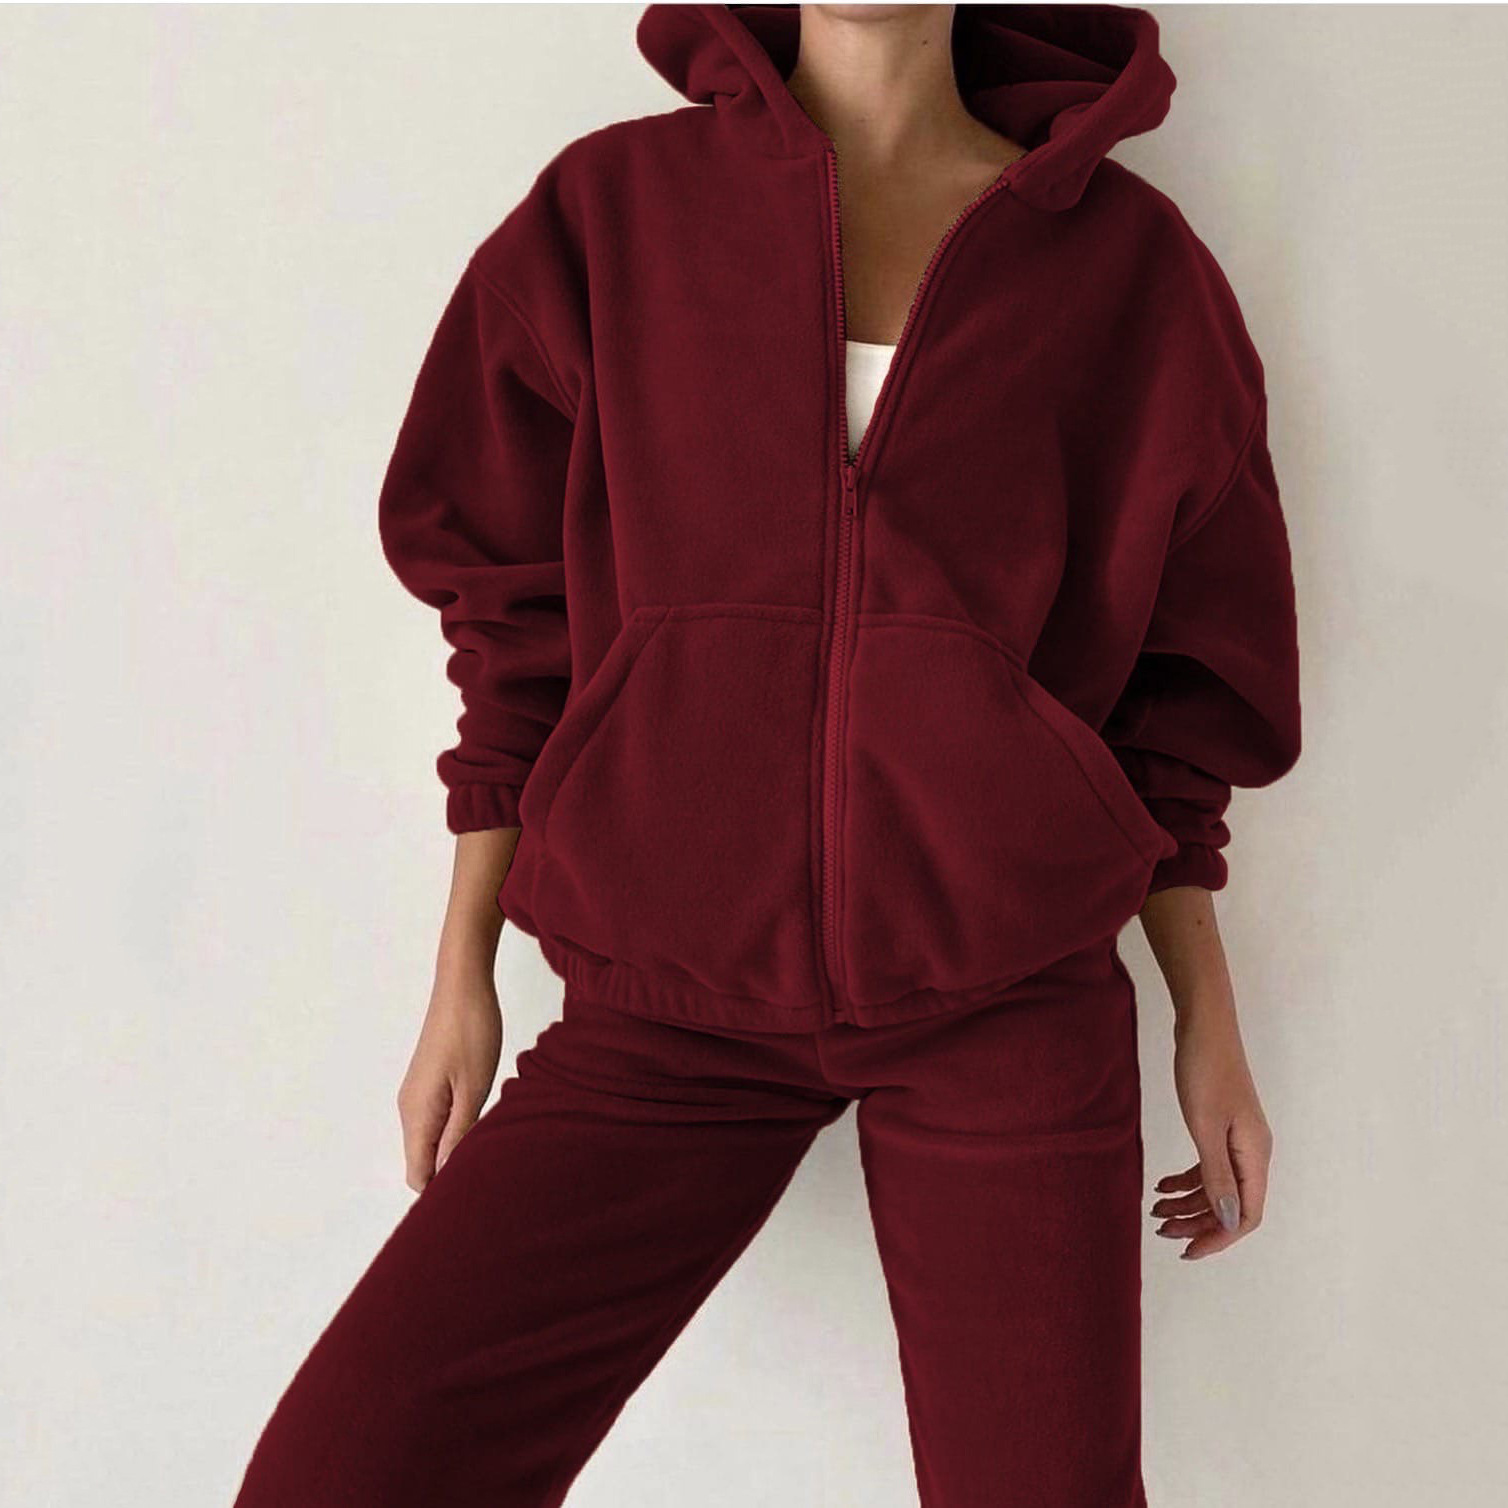 Women's outfit 2-piece hoodie and jogging pants leggings set